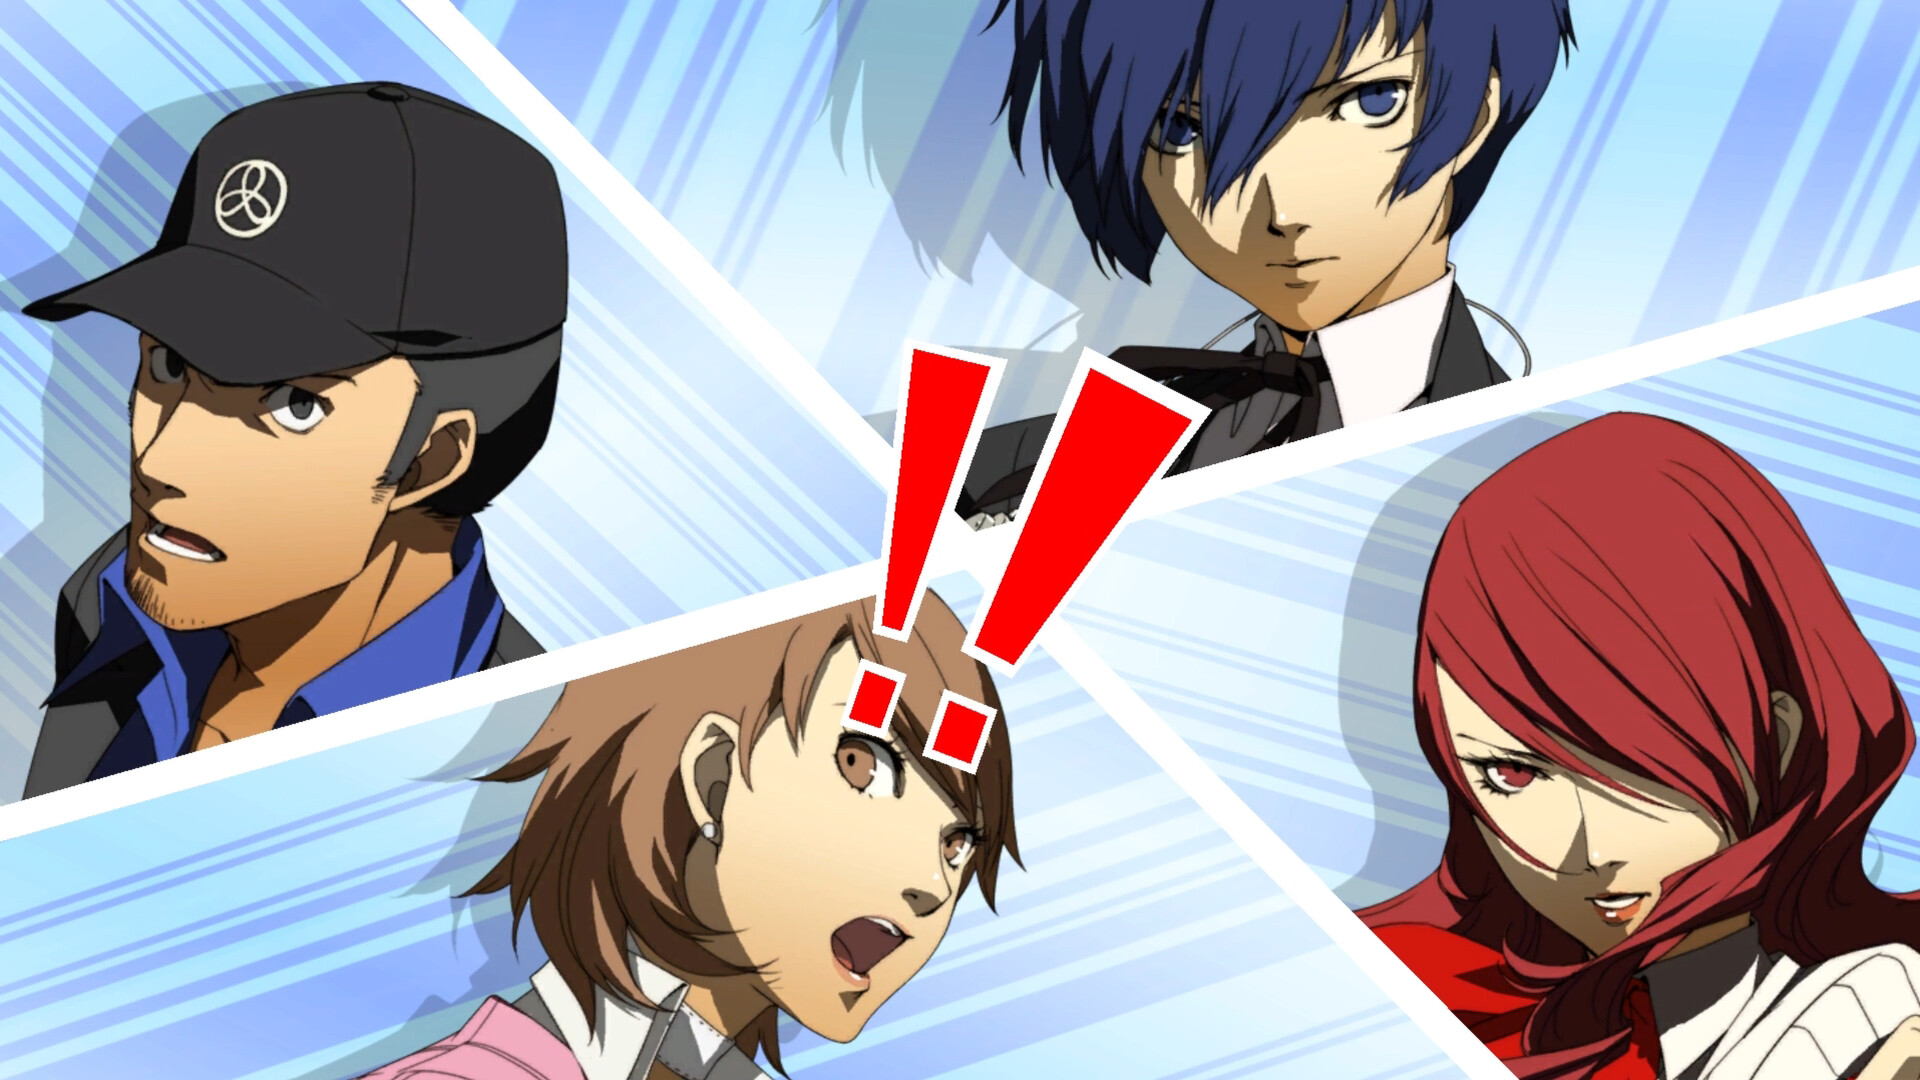 A close-up reaction shot of four character's faces.